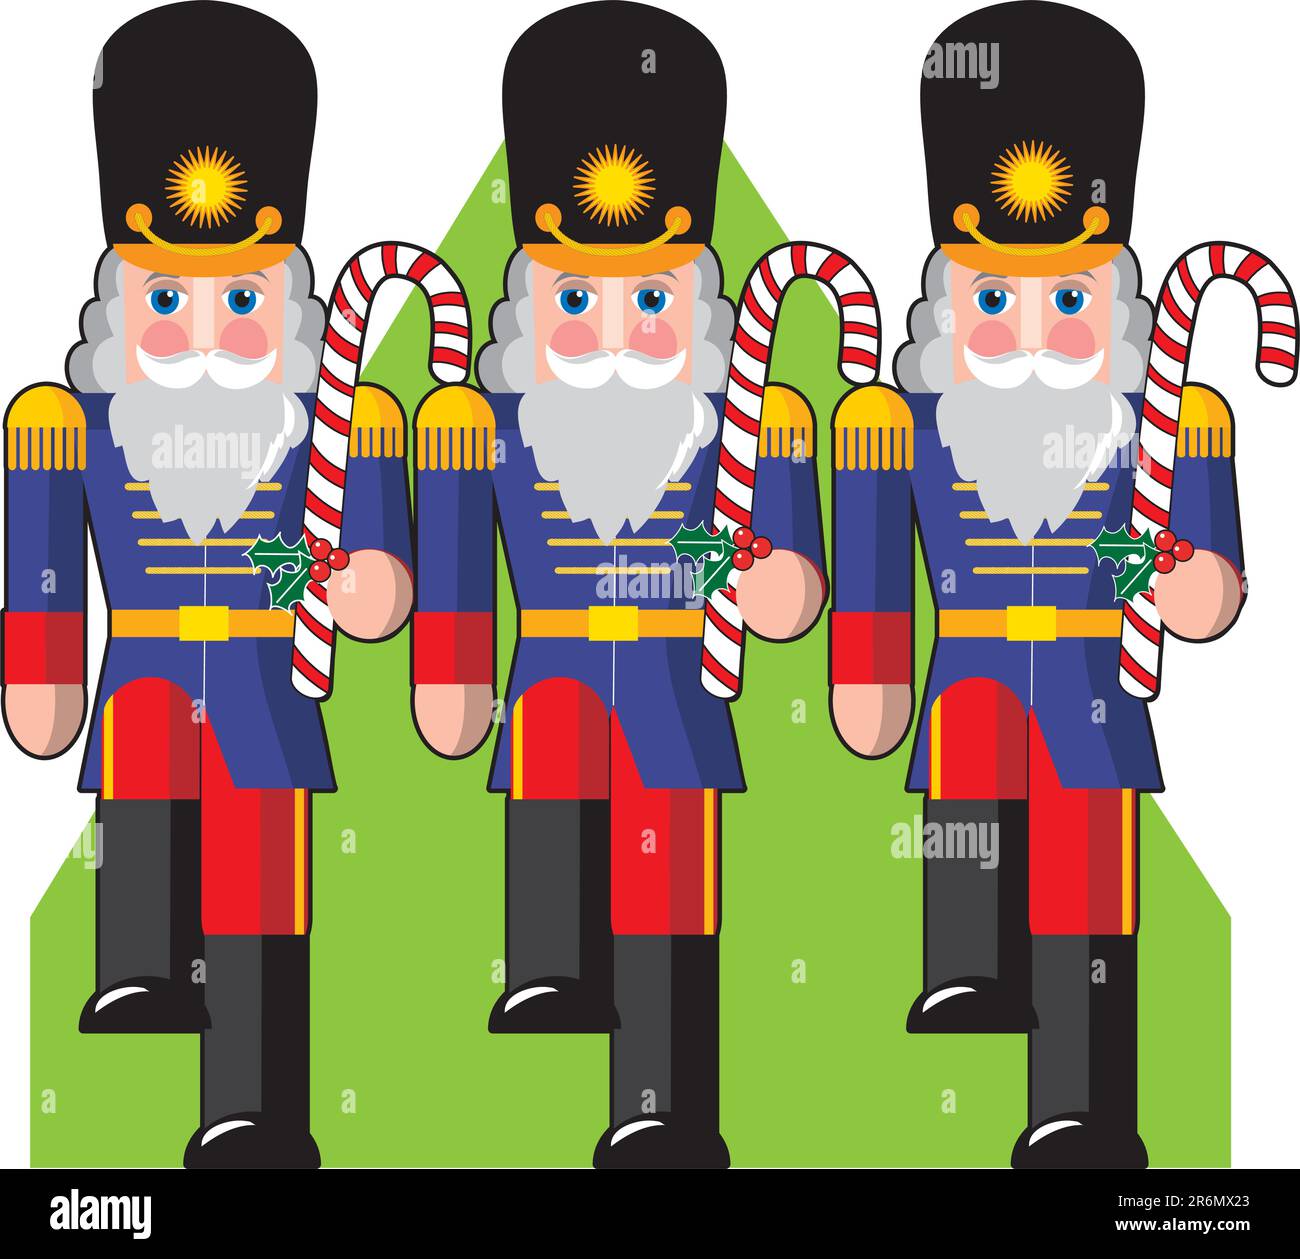 Toy soldiers marching ina row holding candy canes instead of guns Stock Vector